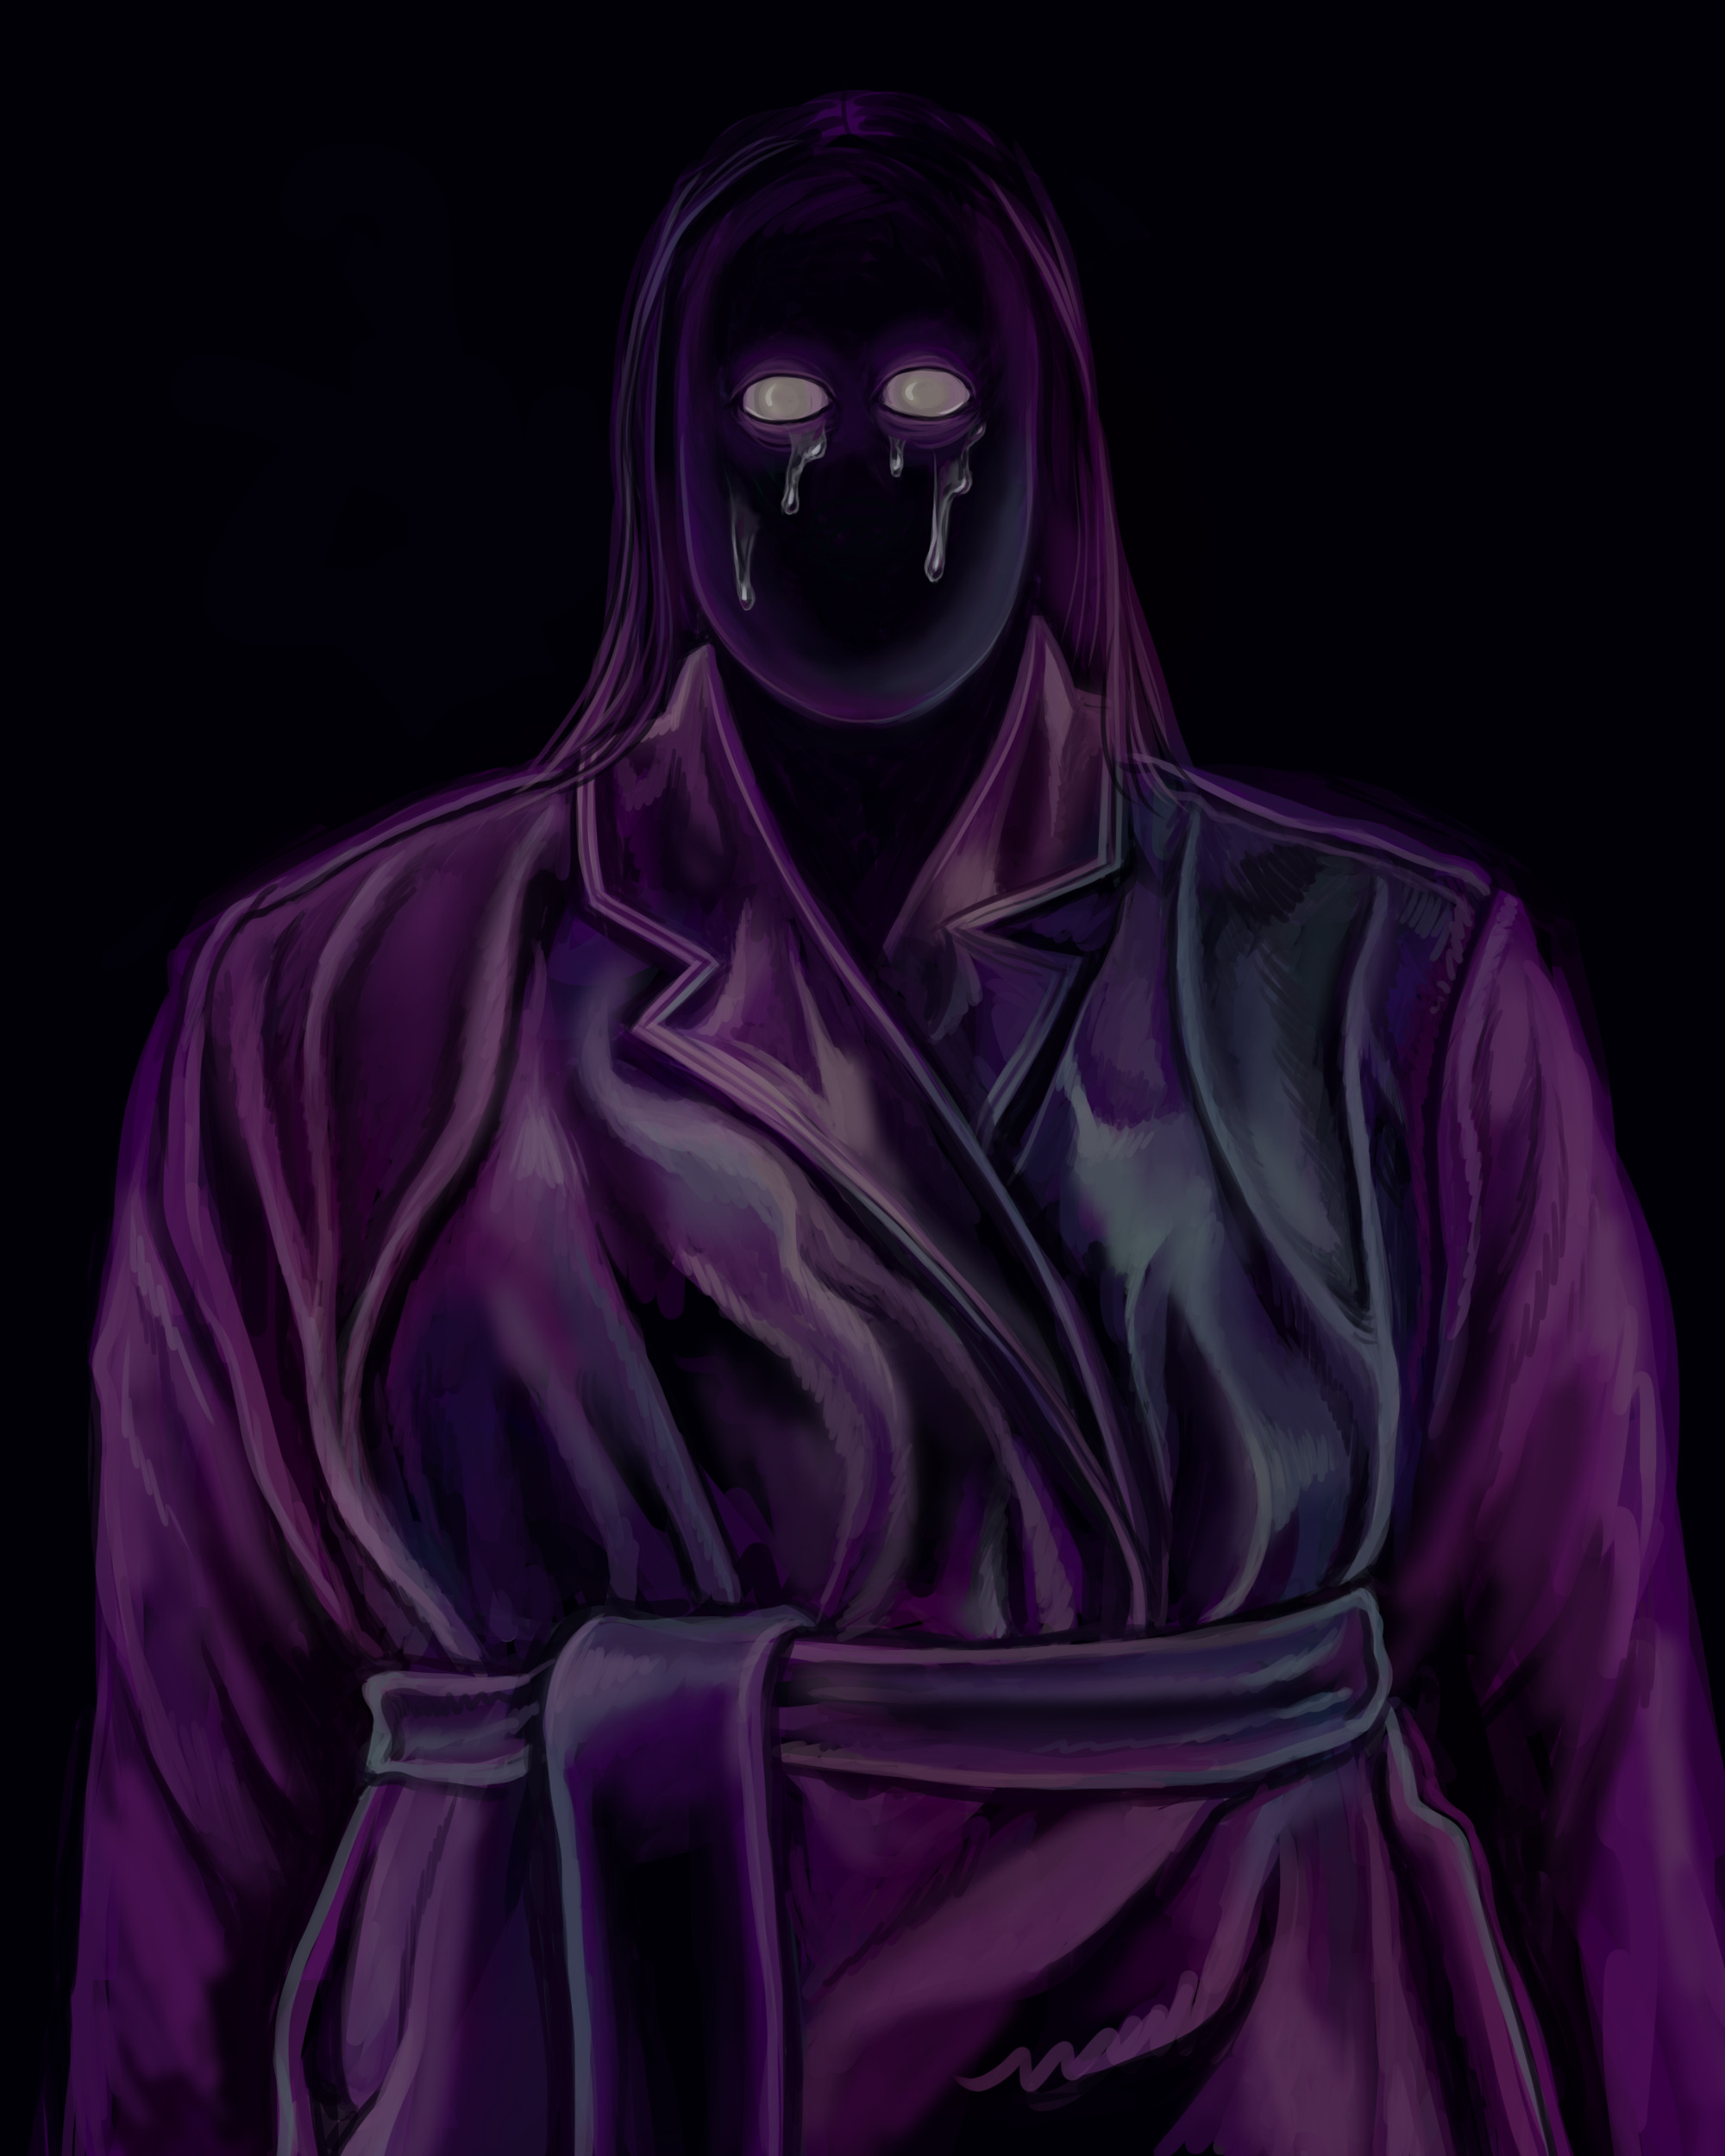 Digital painting on a black background of a figure that is made out of darkness that is shimmering slightly. they have a trench coat on and long hair, and white glowing eyes that are crying tears down their face